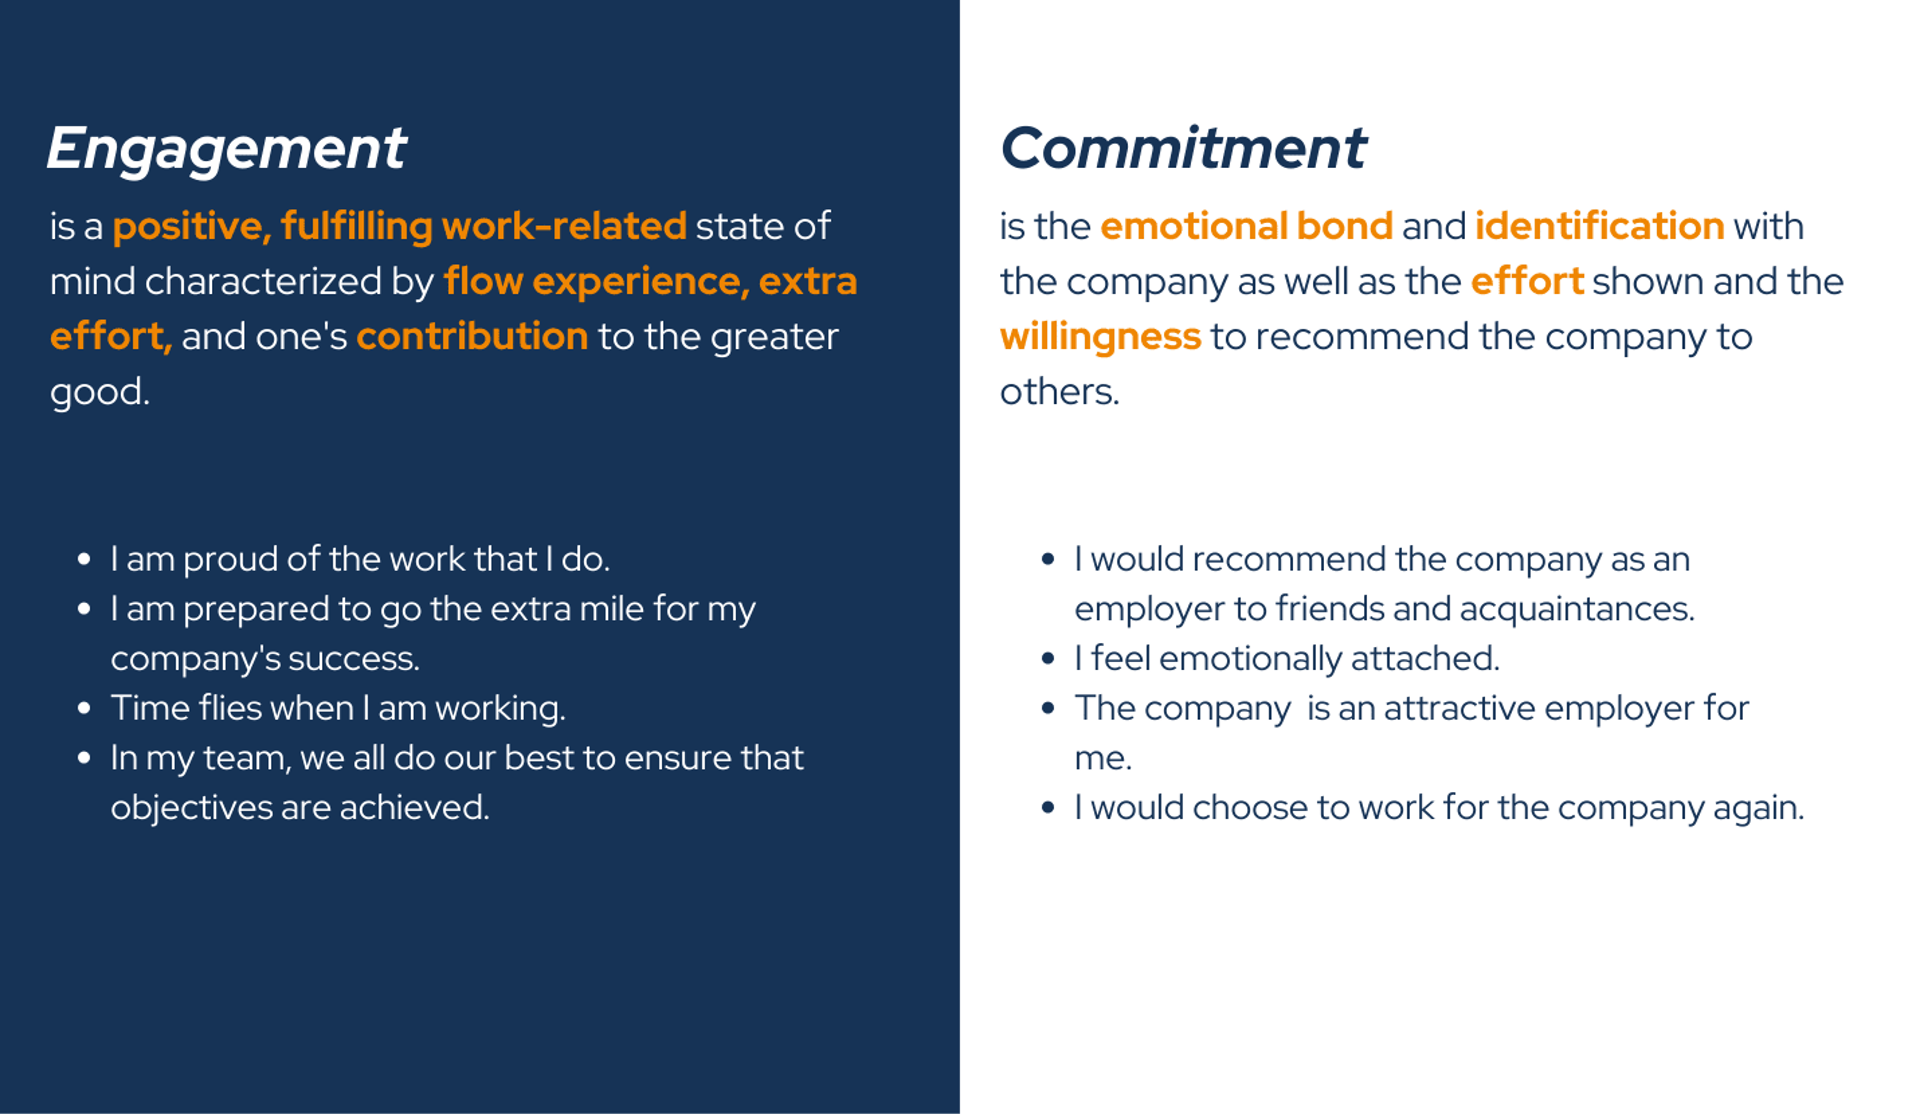 Description of Engagement and Commitment